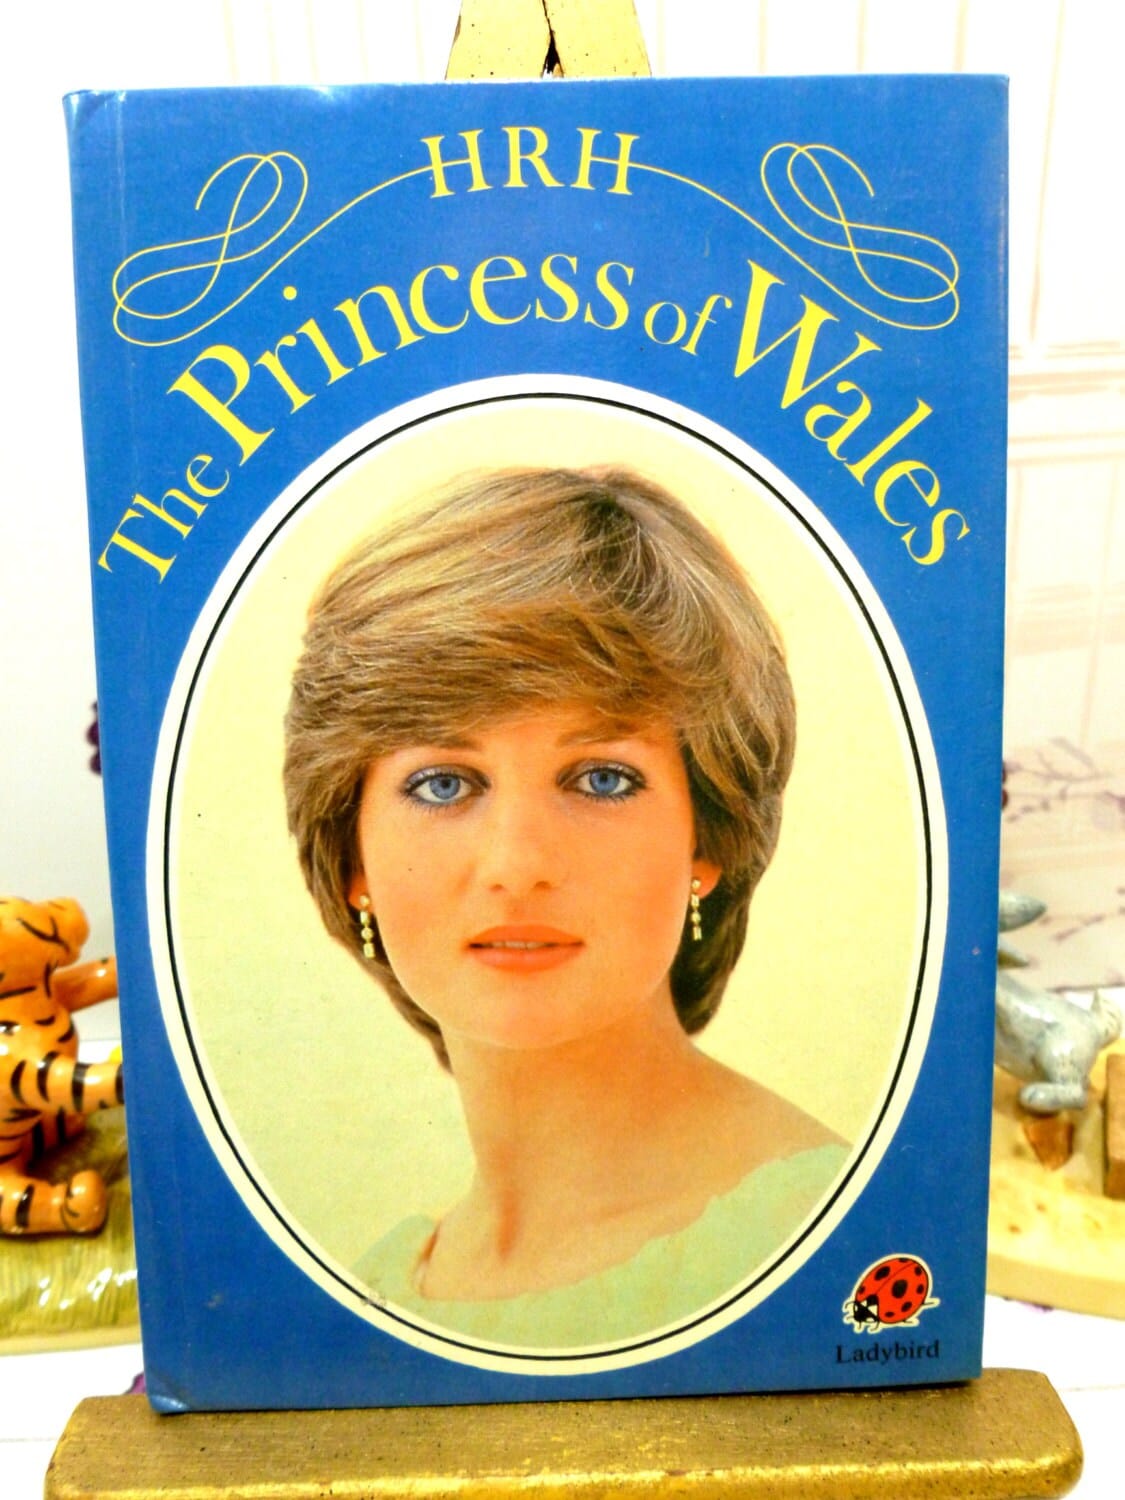 Princess Diana LadyBird Book 1st Ed The Princess of Wales Glossy Cover 1977 First Edition